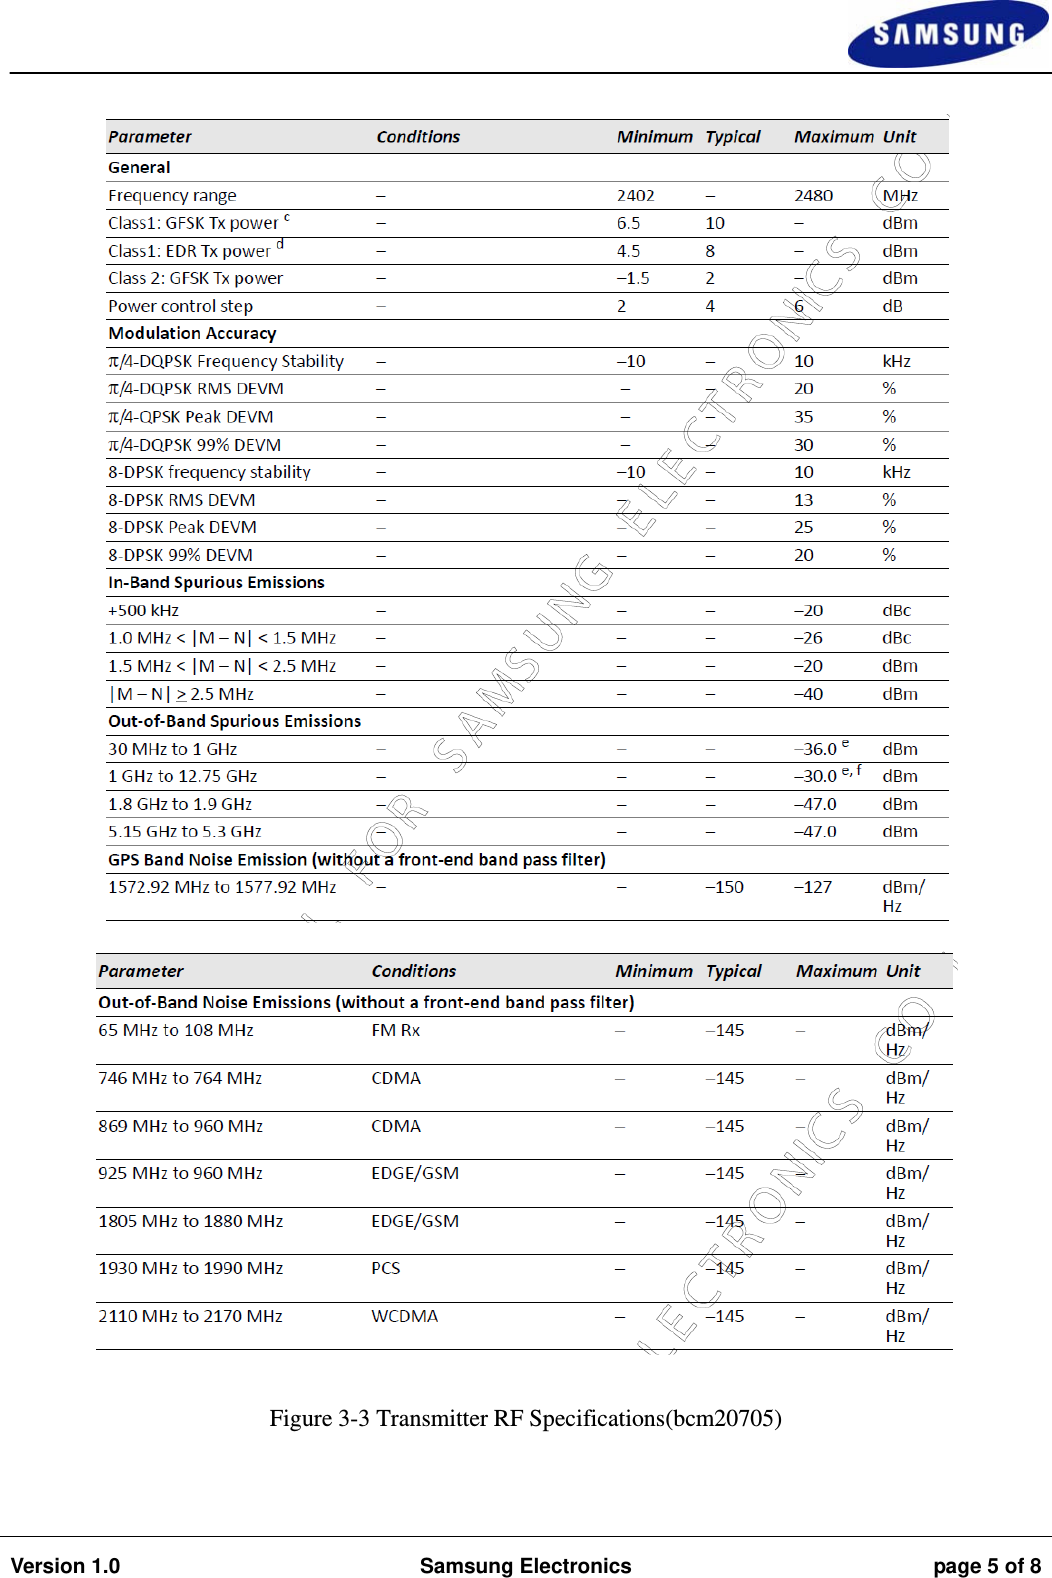                                                                                                                                                                    Version 1.0  Samsung Electronics  page 5 of 8      Figure 3-3 Transmitter RF Specifications(bcm20705) 